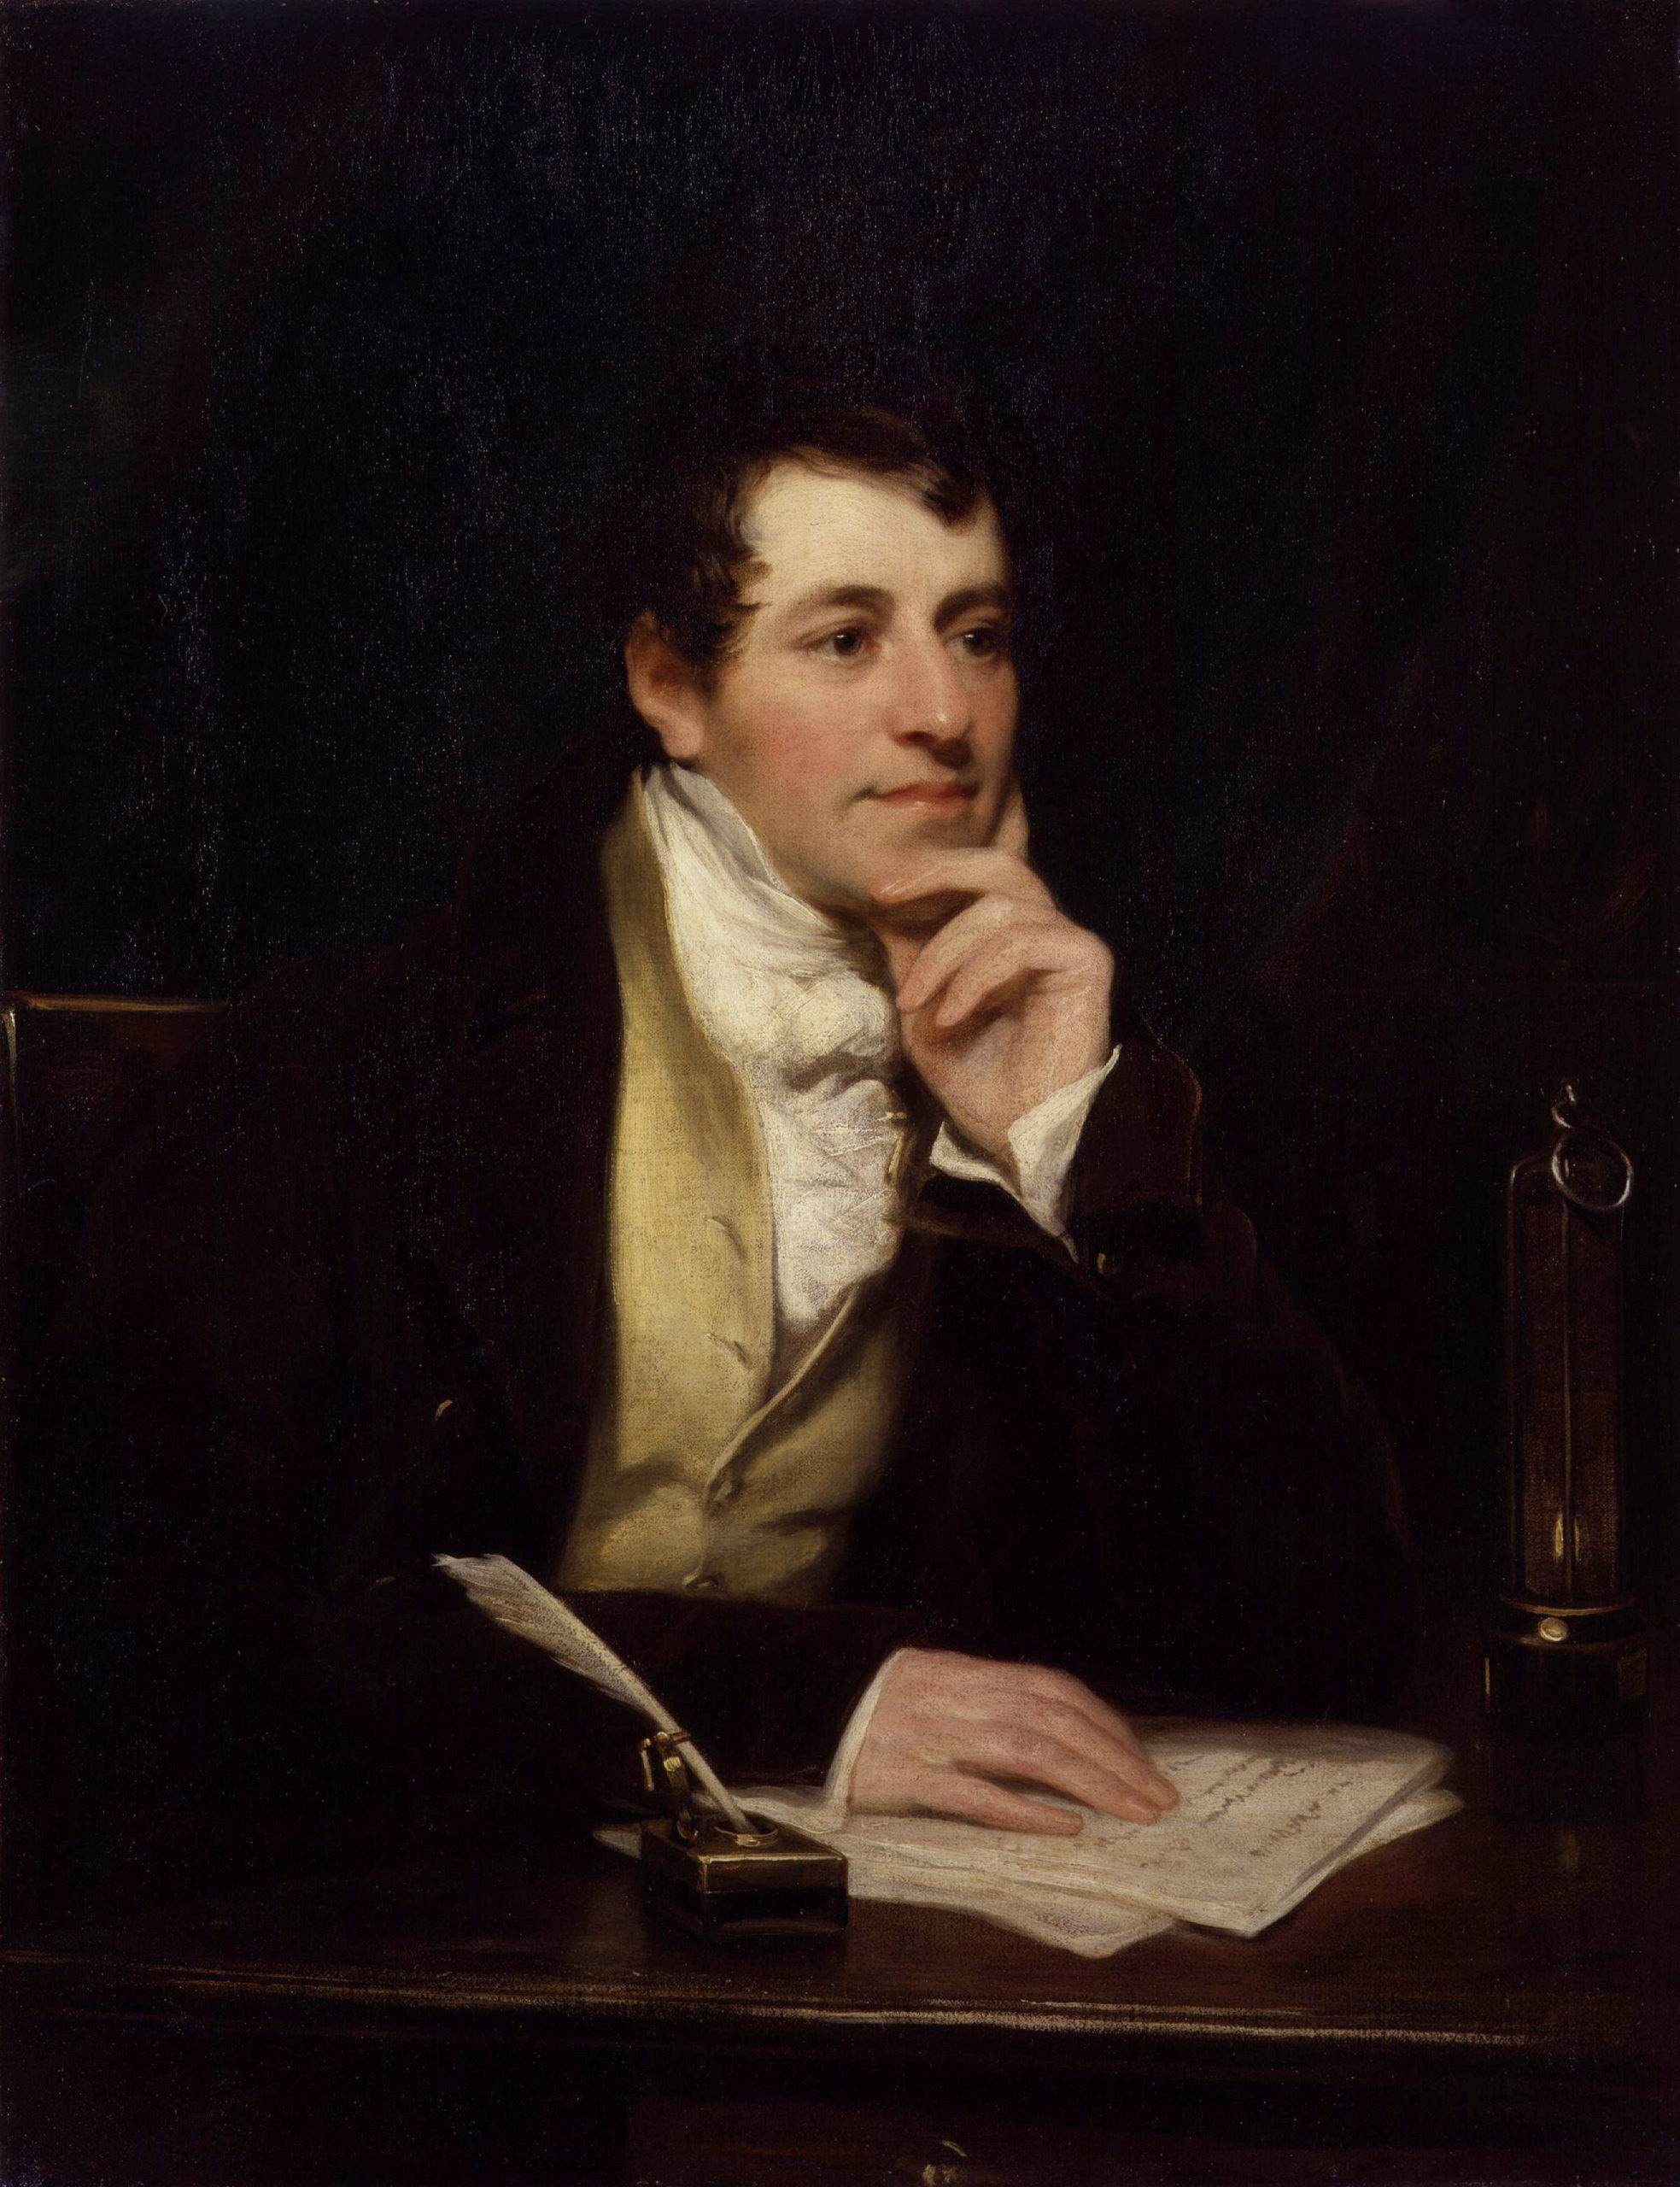 A painting of nineteenth century scientist Humphry Davy